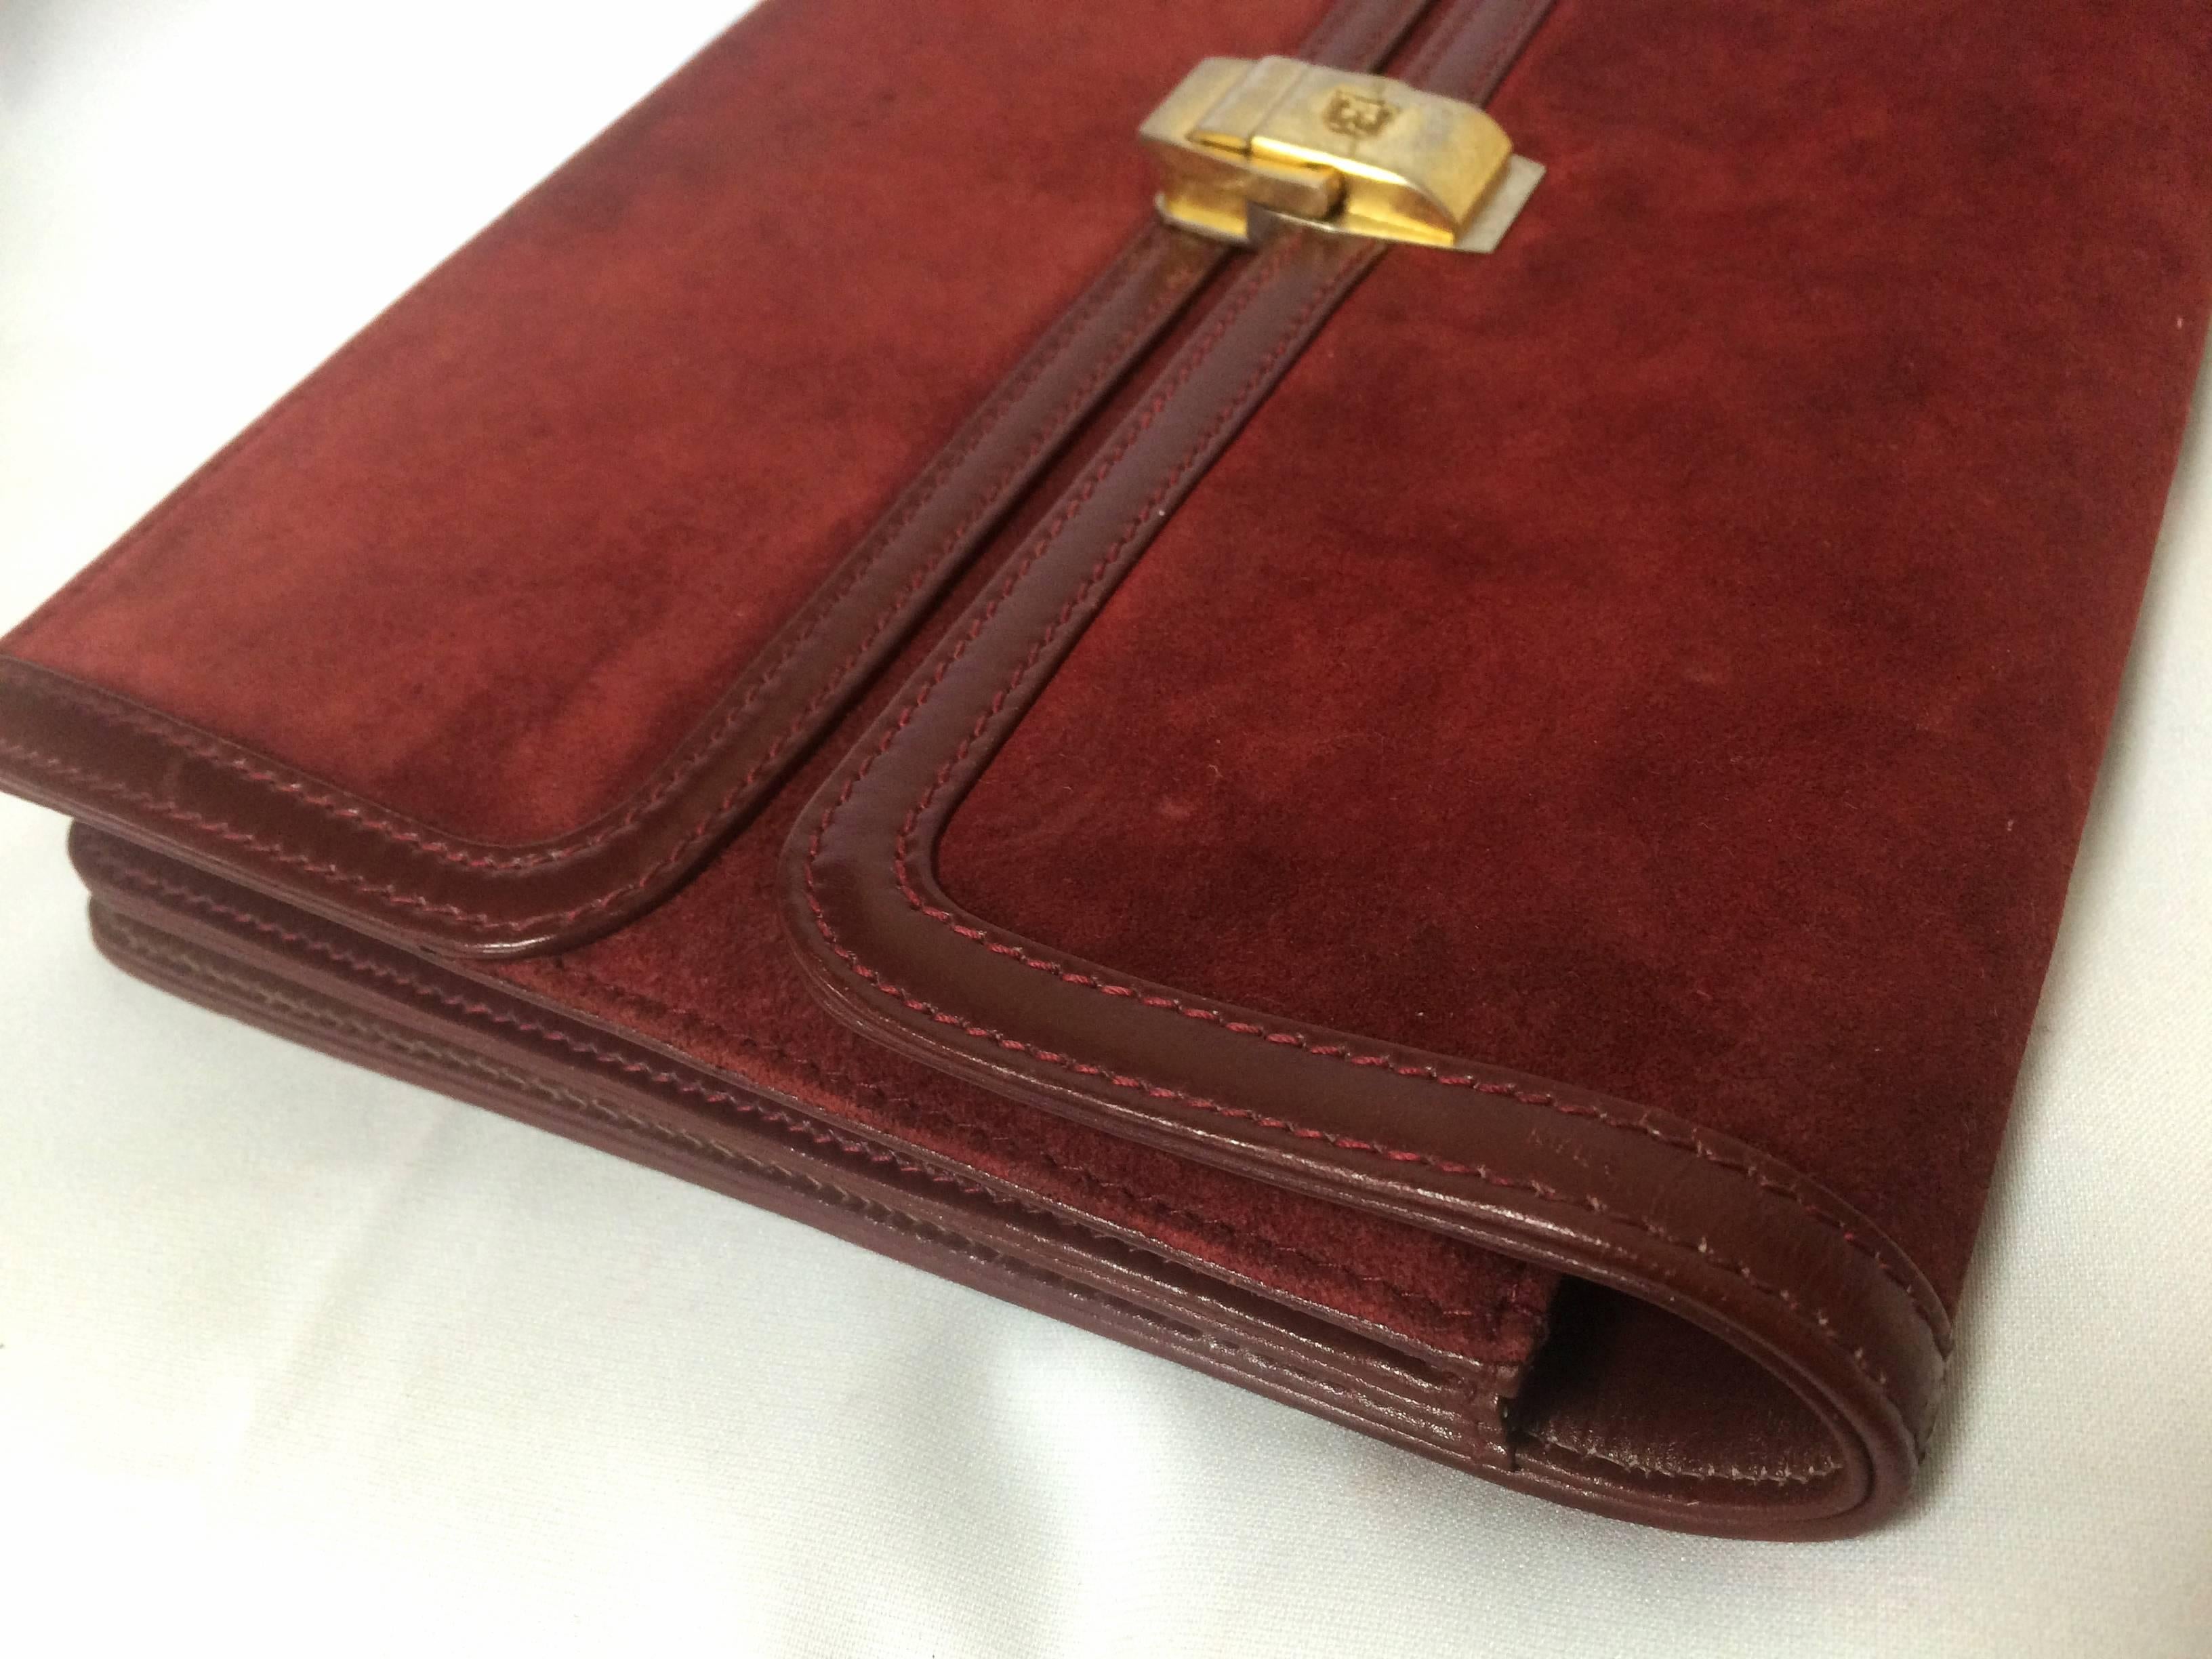 Vintage BALLY genuine wine suede leather clutch bag, mini purse with golden logo For Sale 1